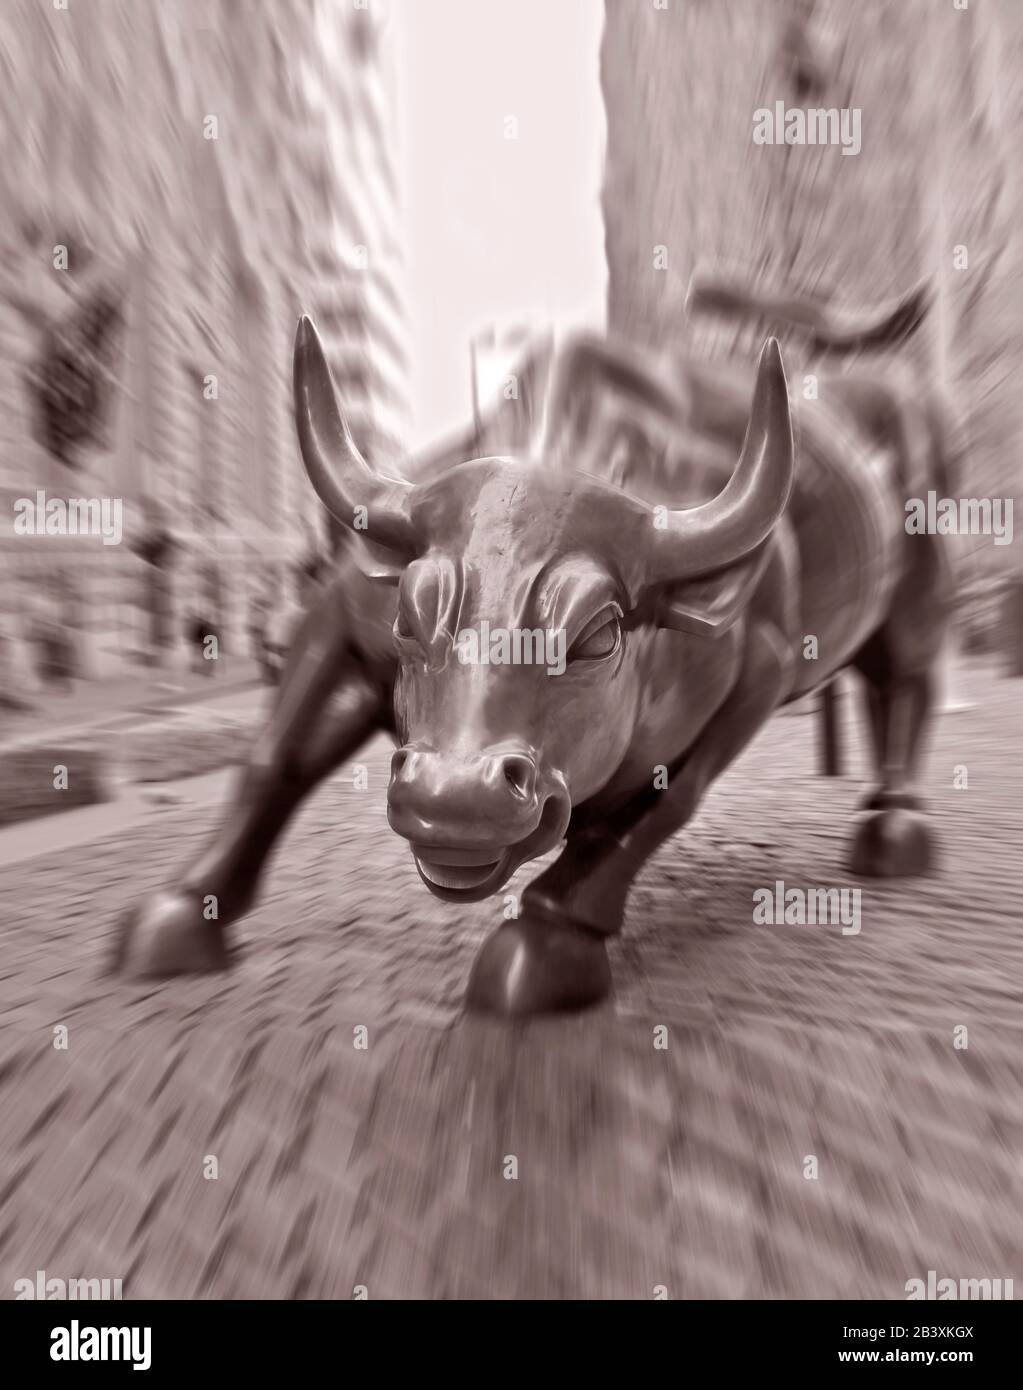 The Wall Street Bull in Lower Manhattan, New York, USA. Large Bronze sculpture by Arturo Di Modica. Photograph with motion, Bull's face is sharp Stock Photo